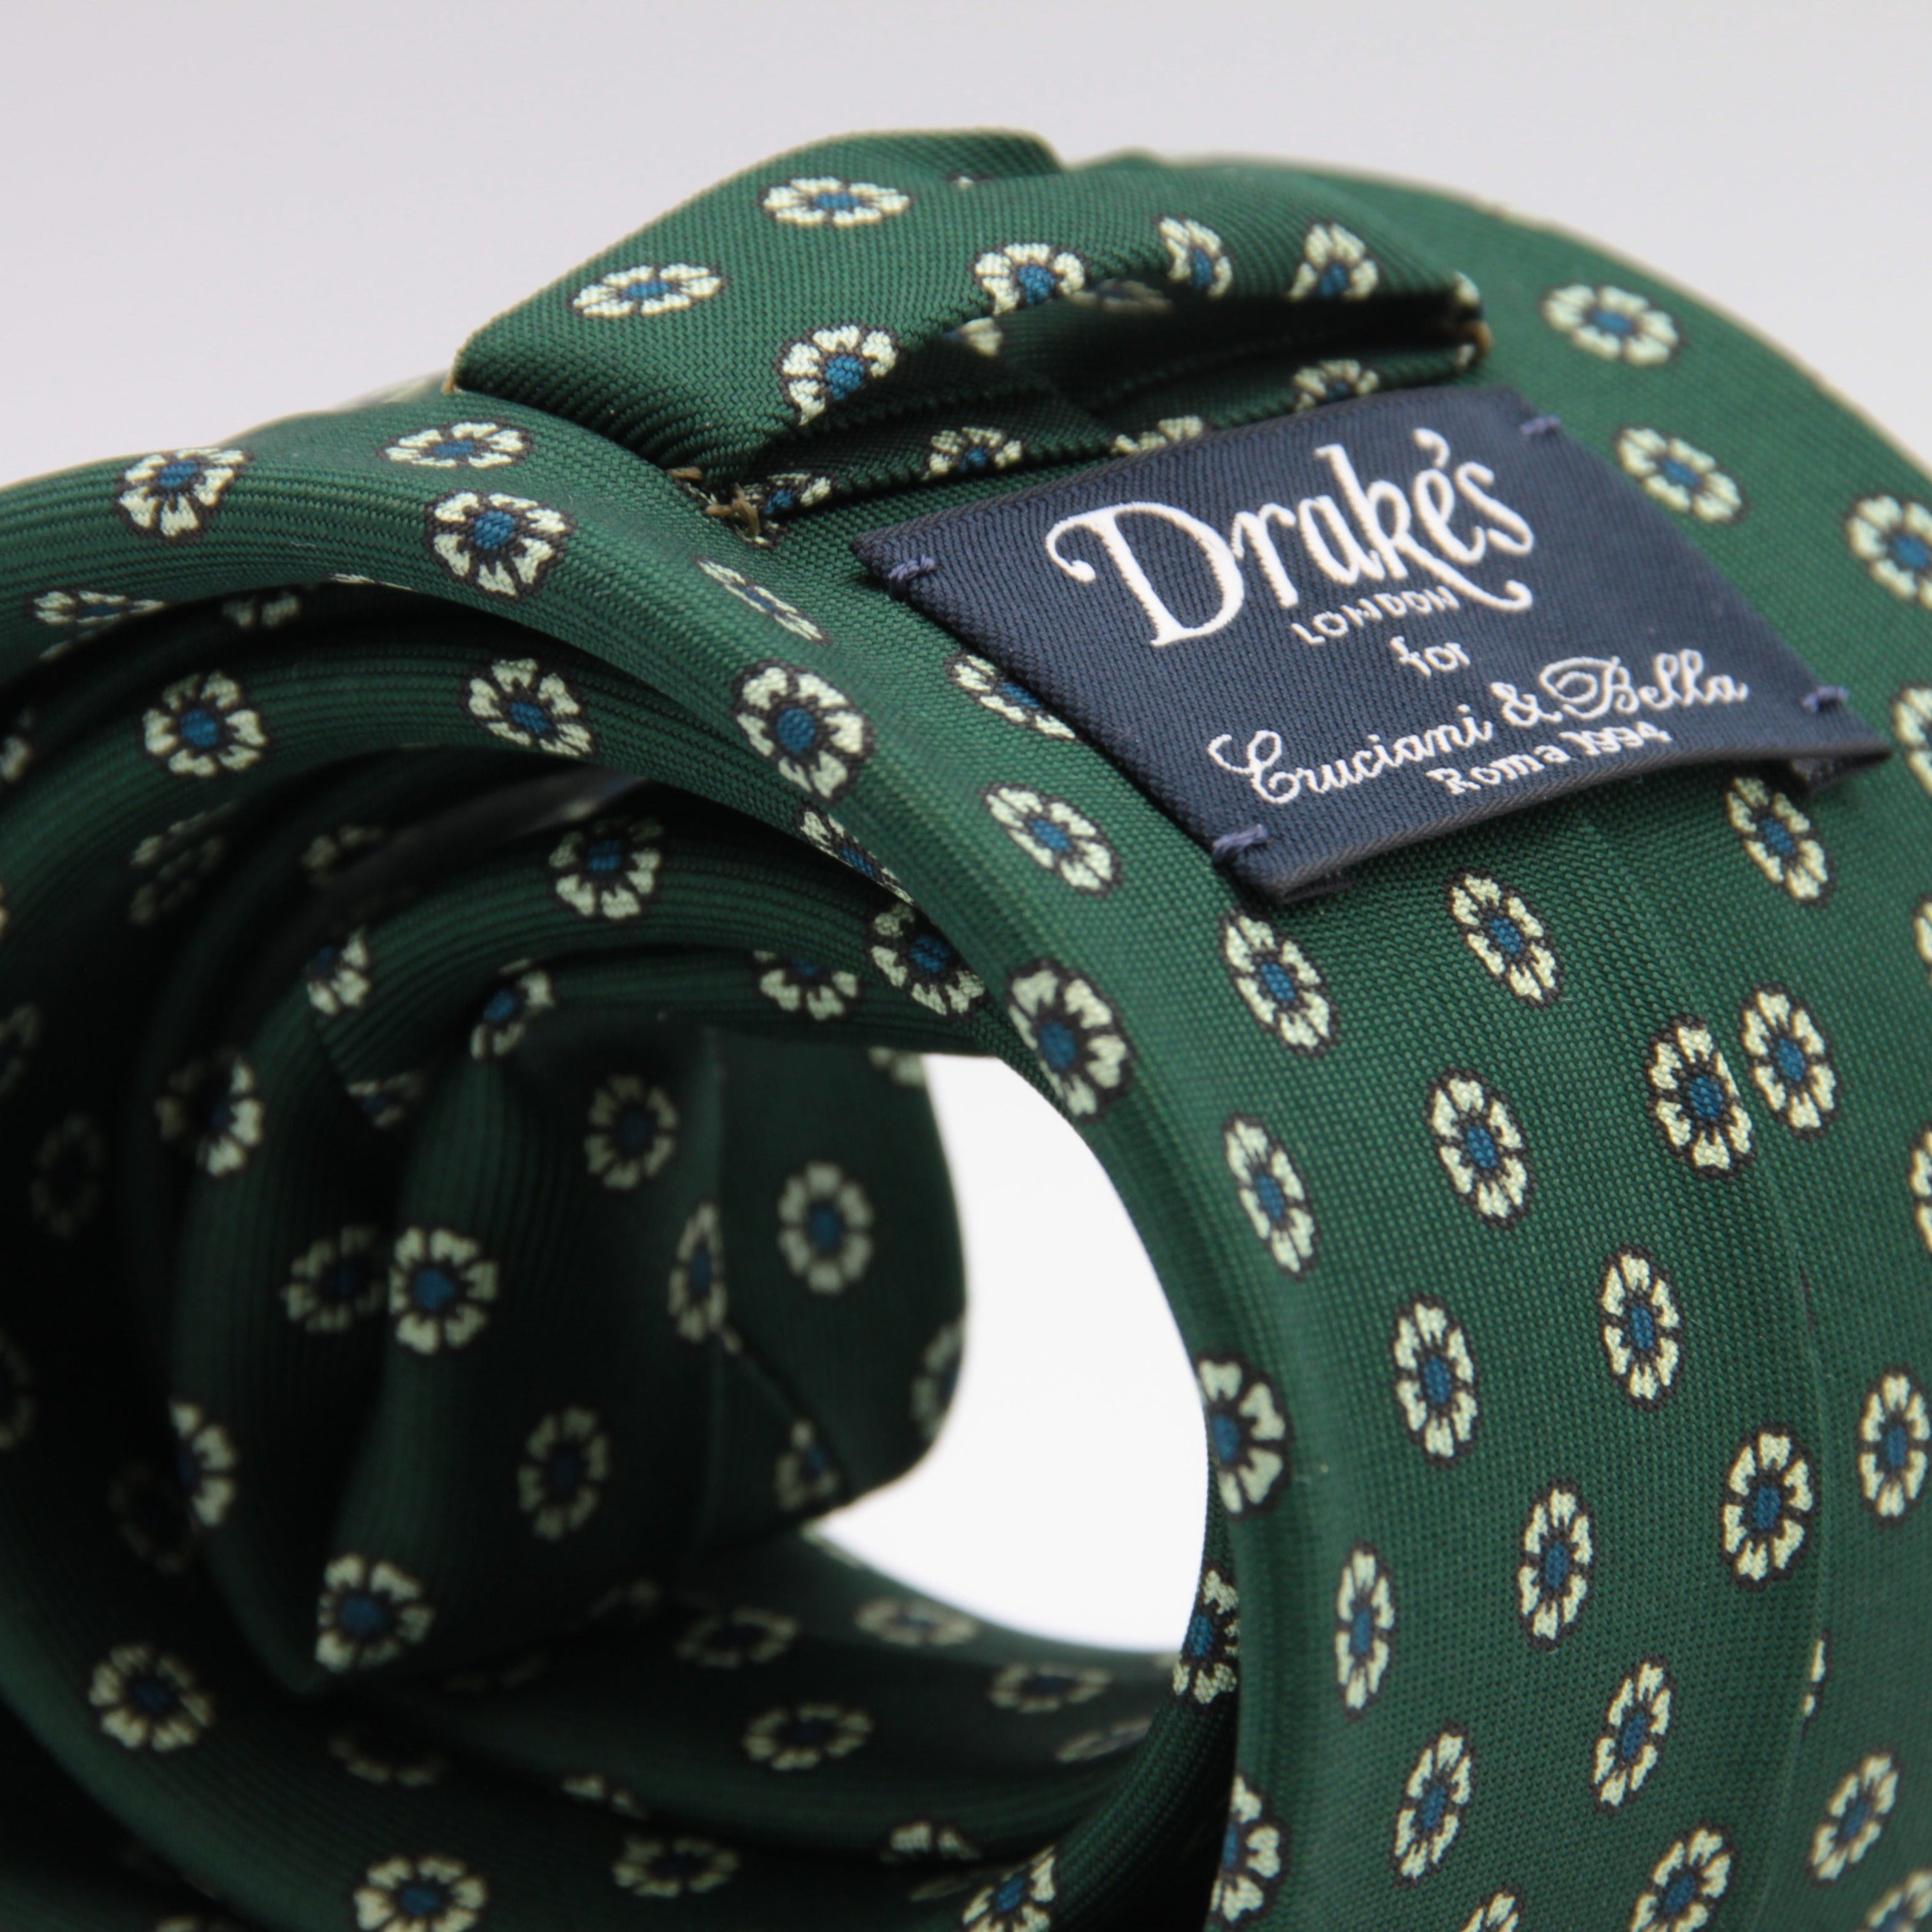 Drake's for Cruciani & Bella 36 oz Self-Tipped 100% Printed Silk Green, White and Blue Motif Tie Handmade in London. England 9 cm x 150 cm #3851